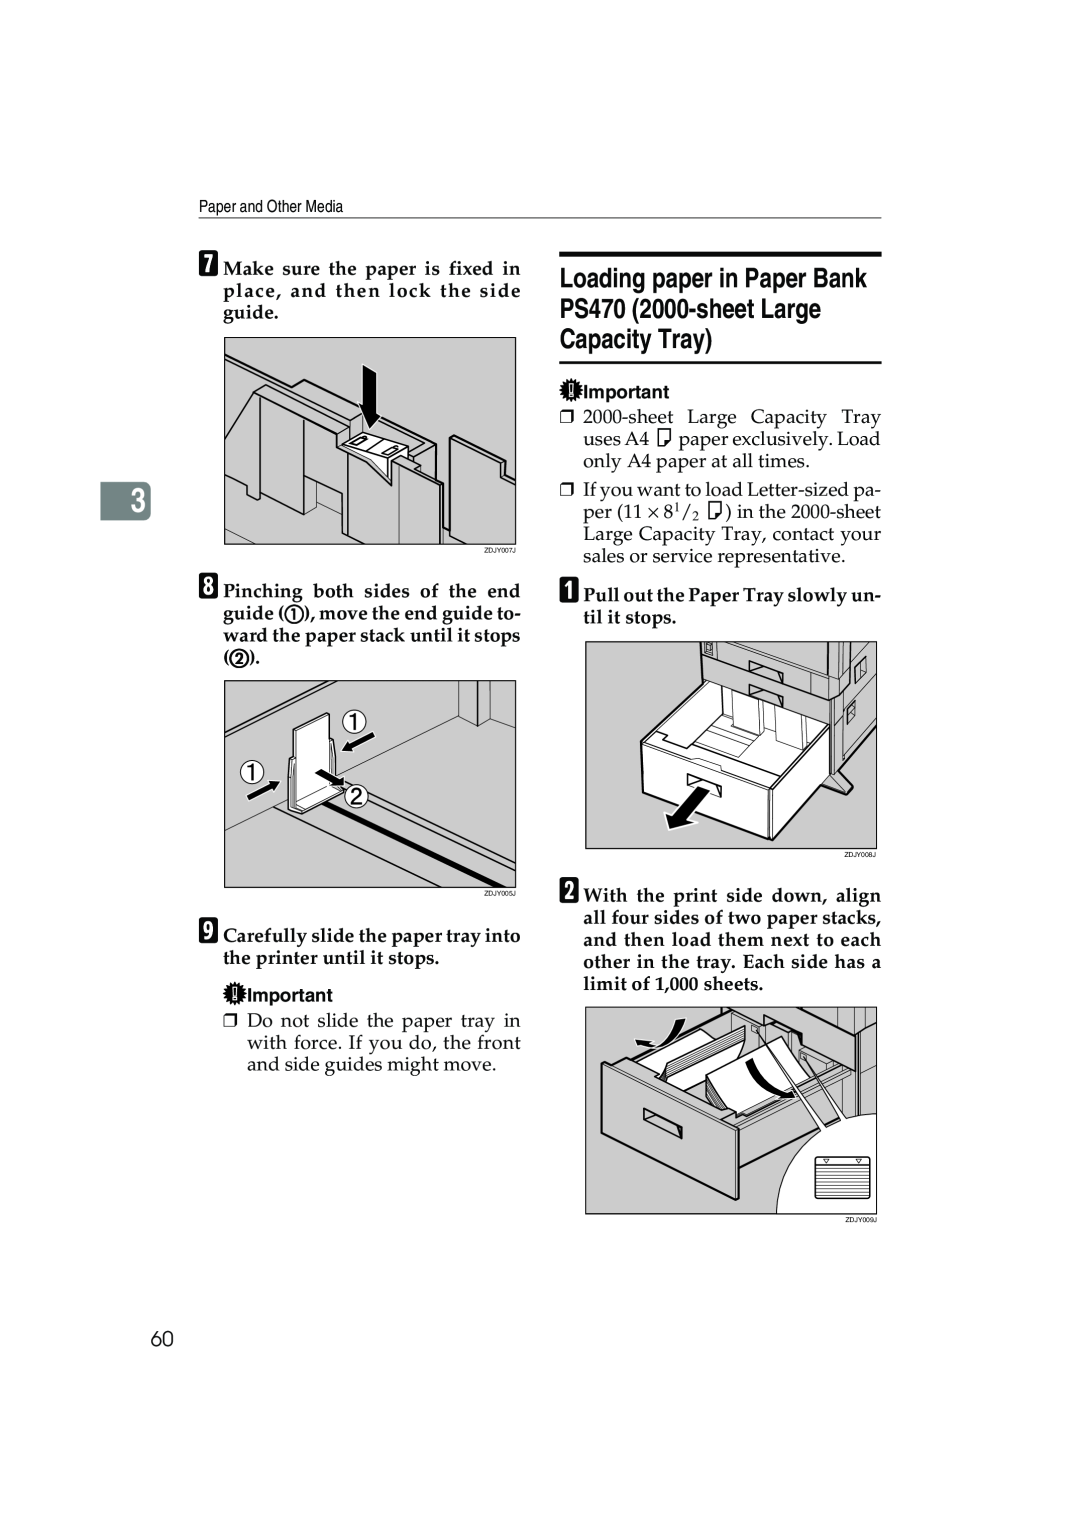 Ricoh AP3800C operating instructions A Pull out the Paper Tray slowly un- til it stops 